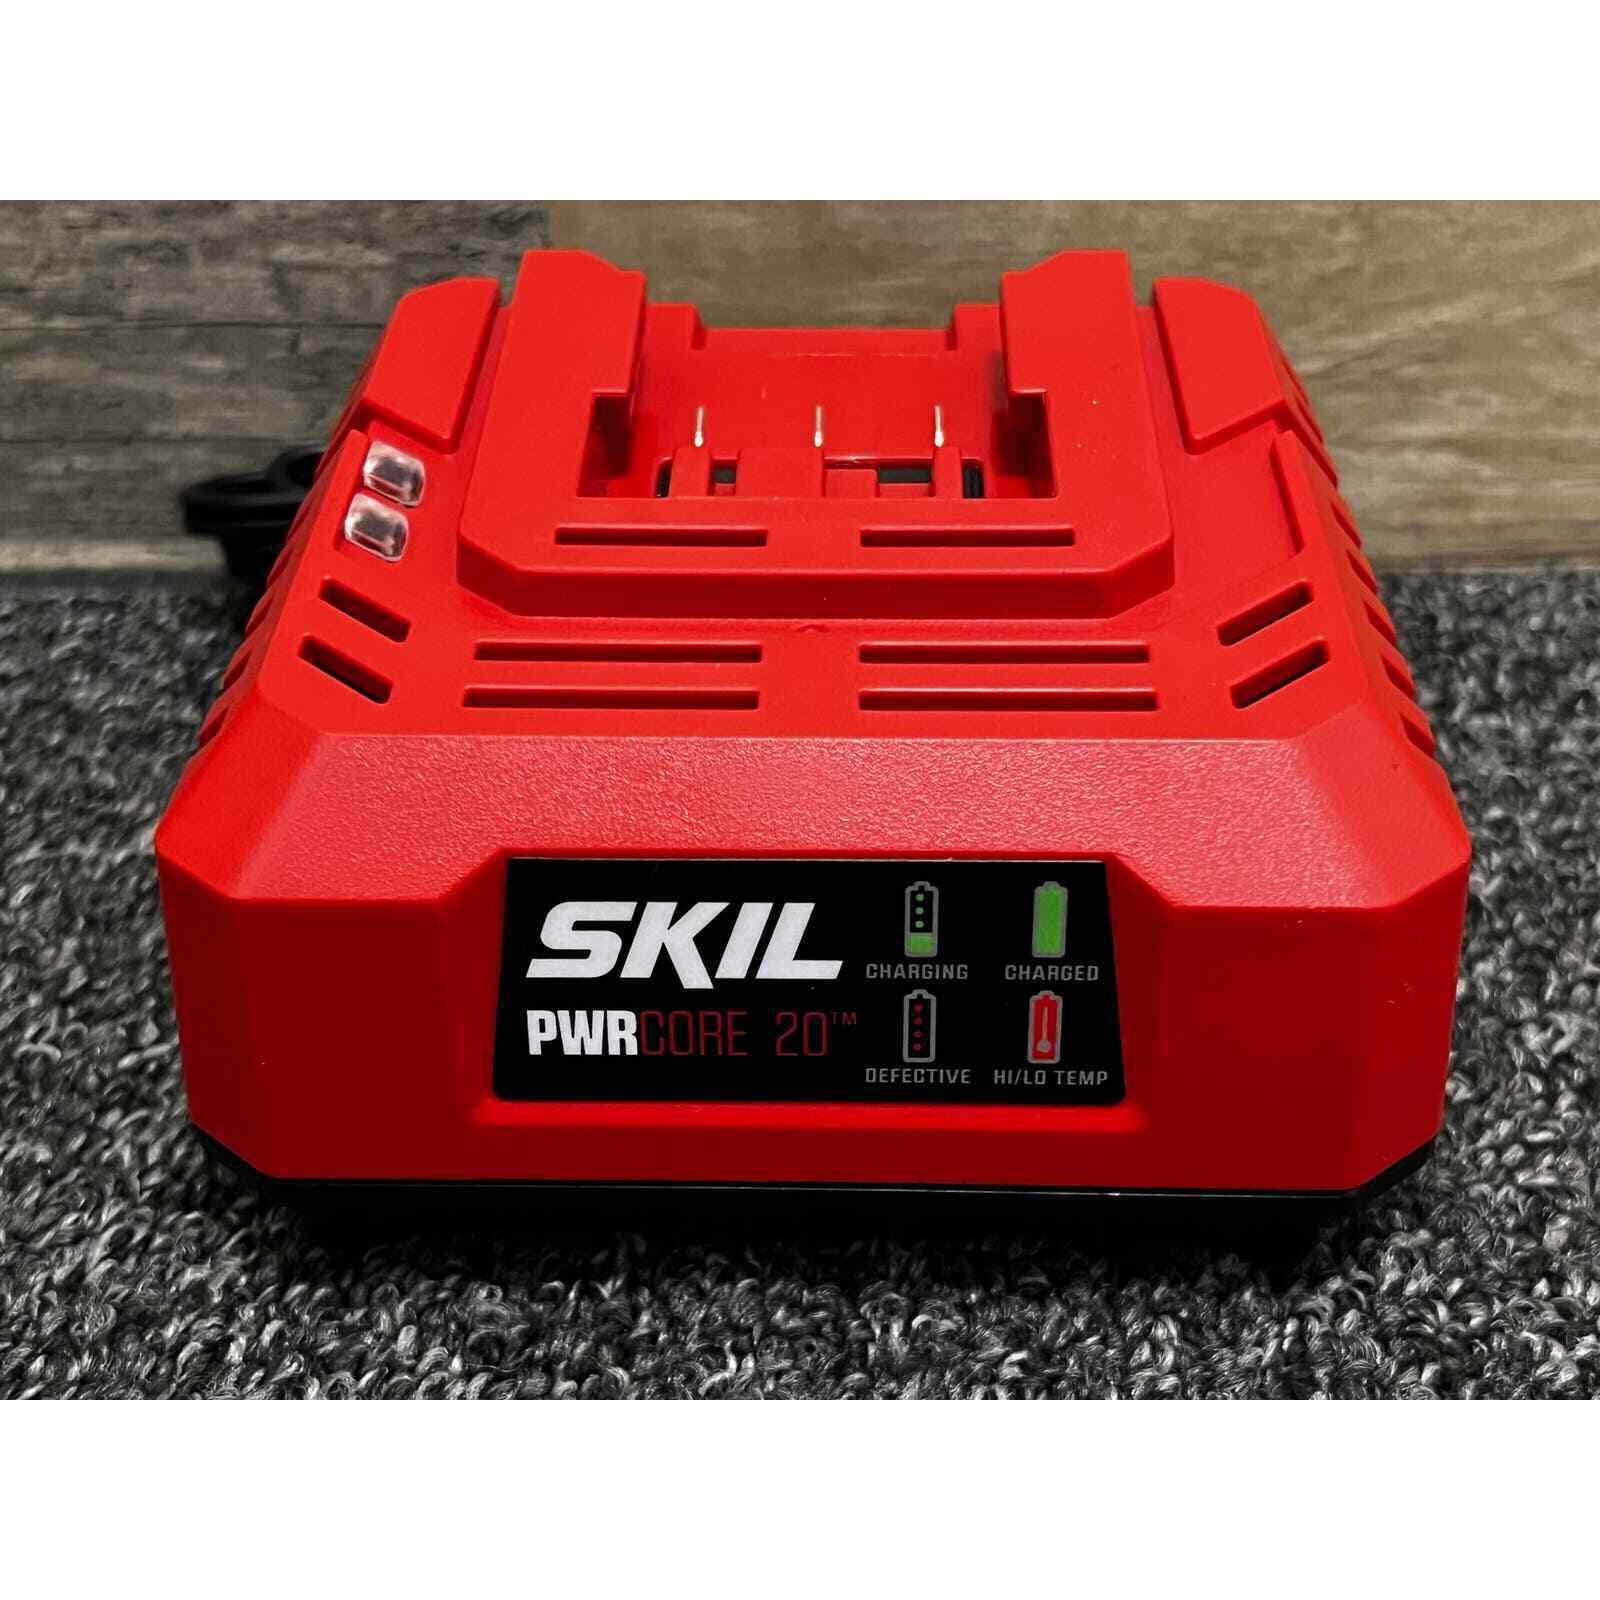 SKIL PWRCore 20 20V Lithium-Ion Battery Charger SC535801 - $19.34